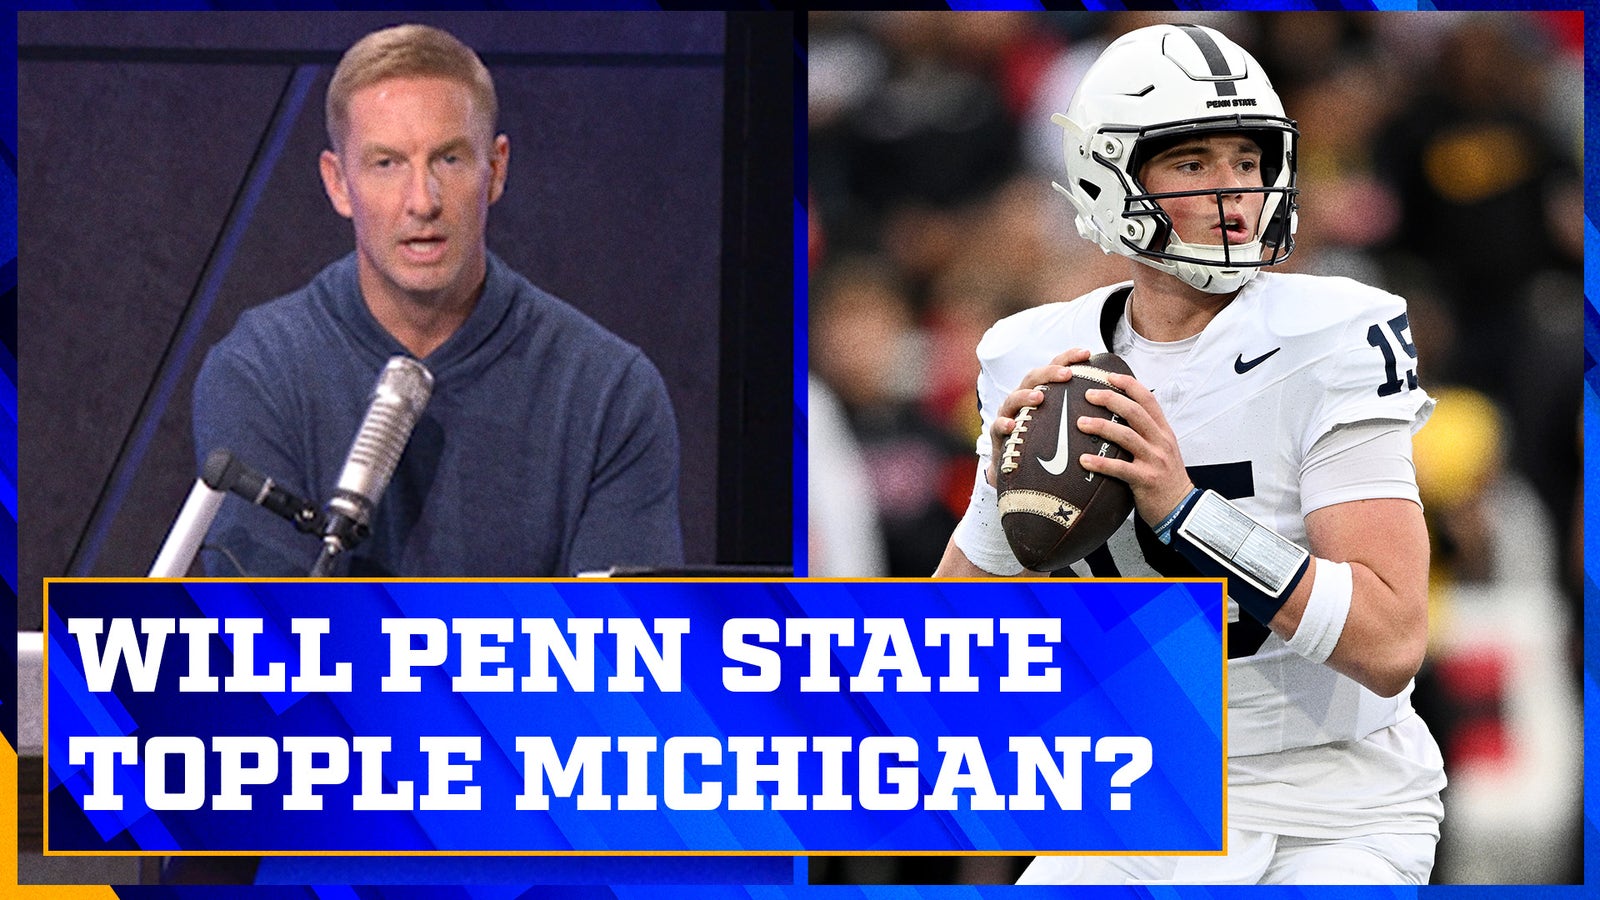 Beryl TV cagdvaor3lc3nqo2 Big Noon Live: Everything to know ahead of Michigan vs. Penn State Sports 